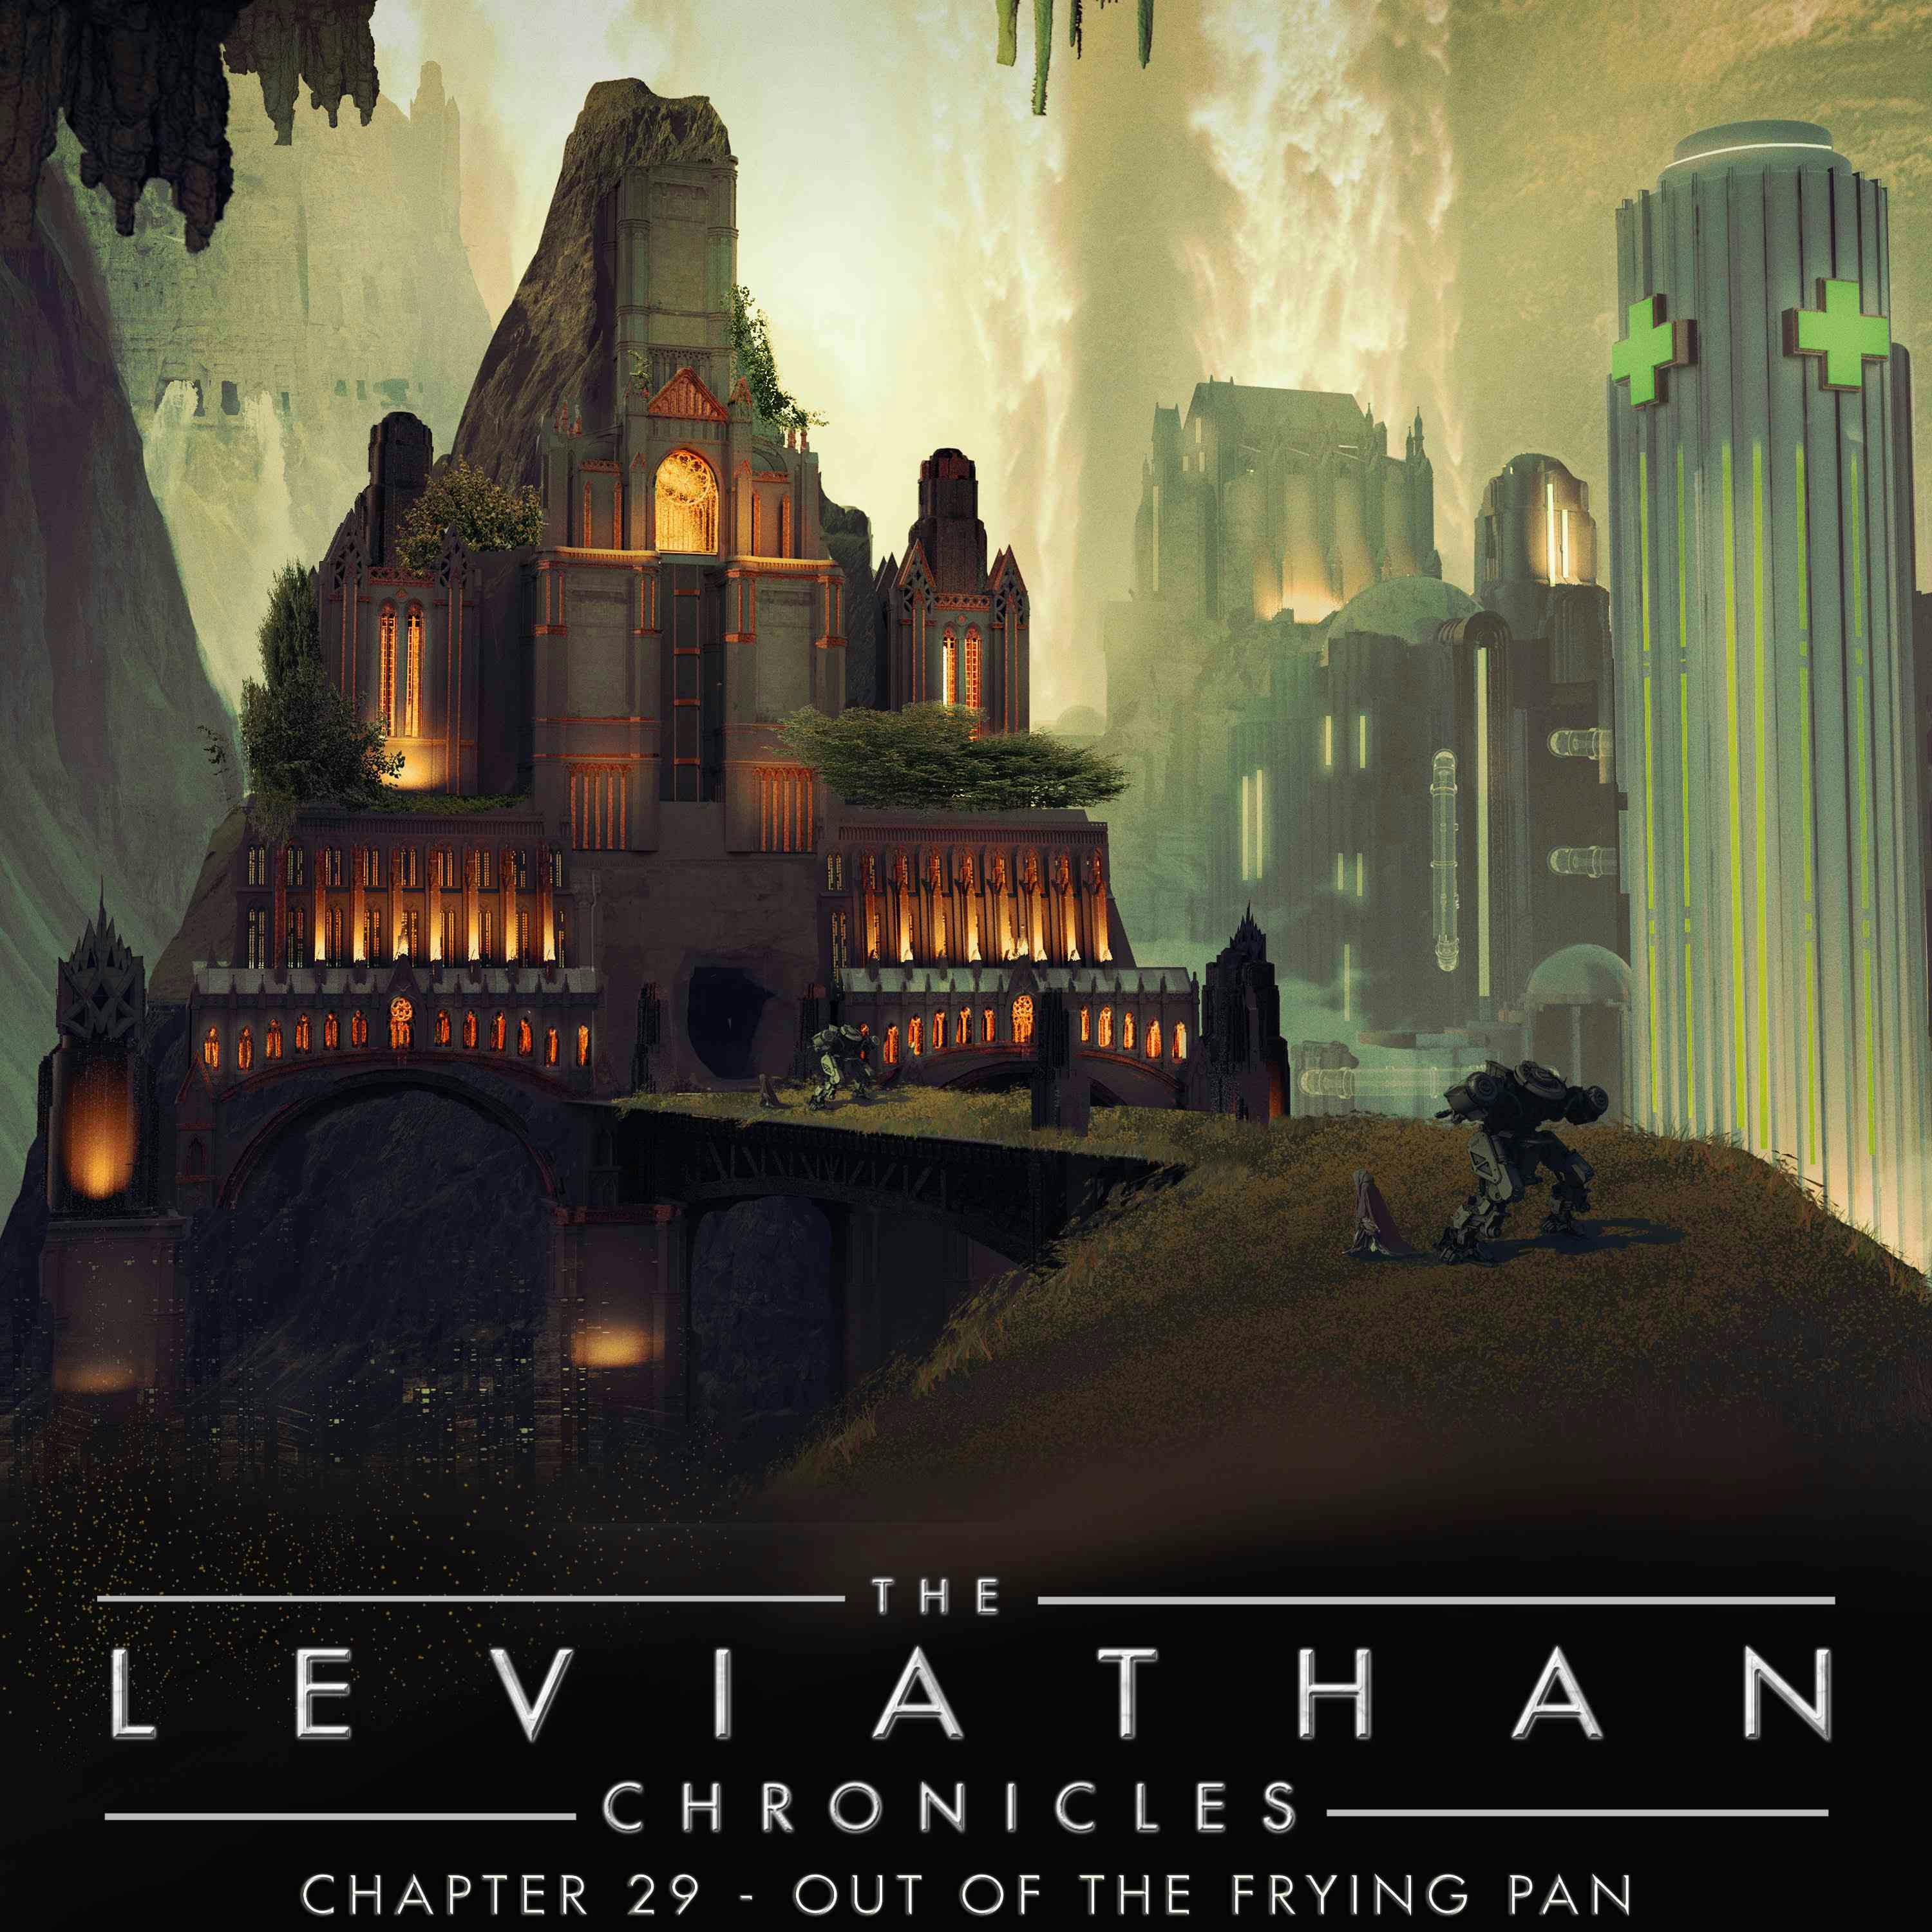 The Leviathan Chronicles | Chapter 29 - Out of the Frying Pan